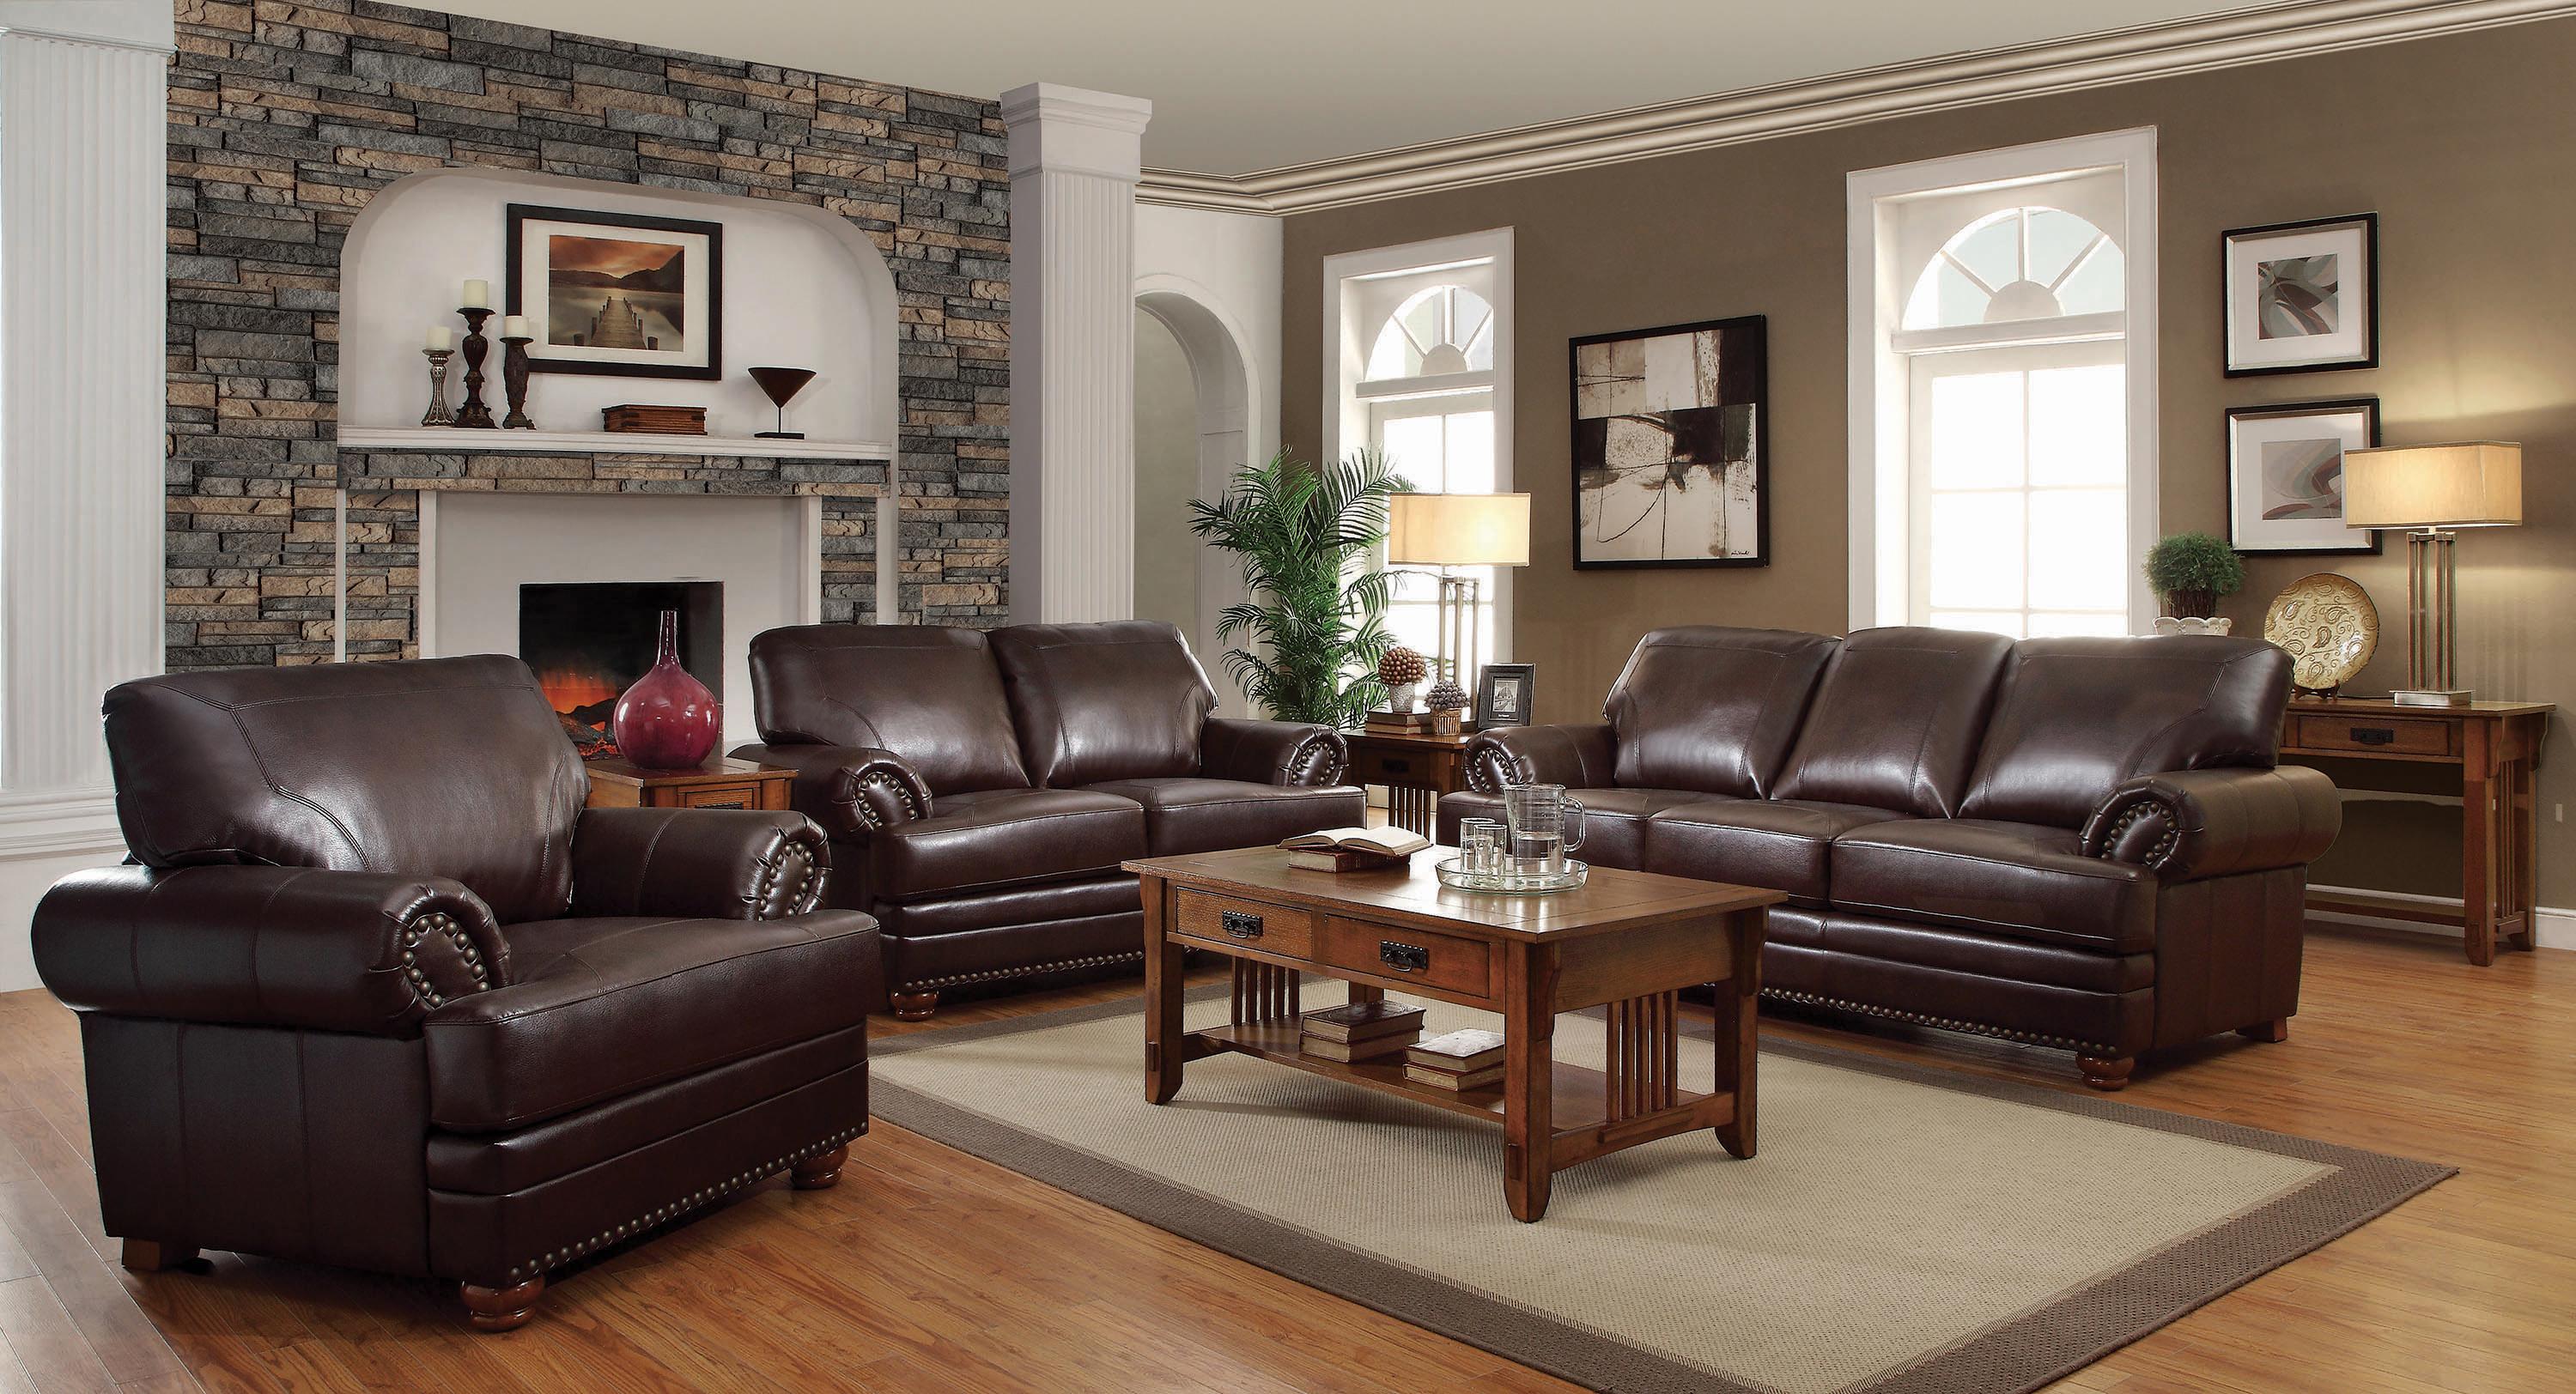 Traditional Living Room Set 504411-S3 Colton 504411-S3 in Brown Leatherette